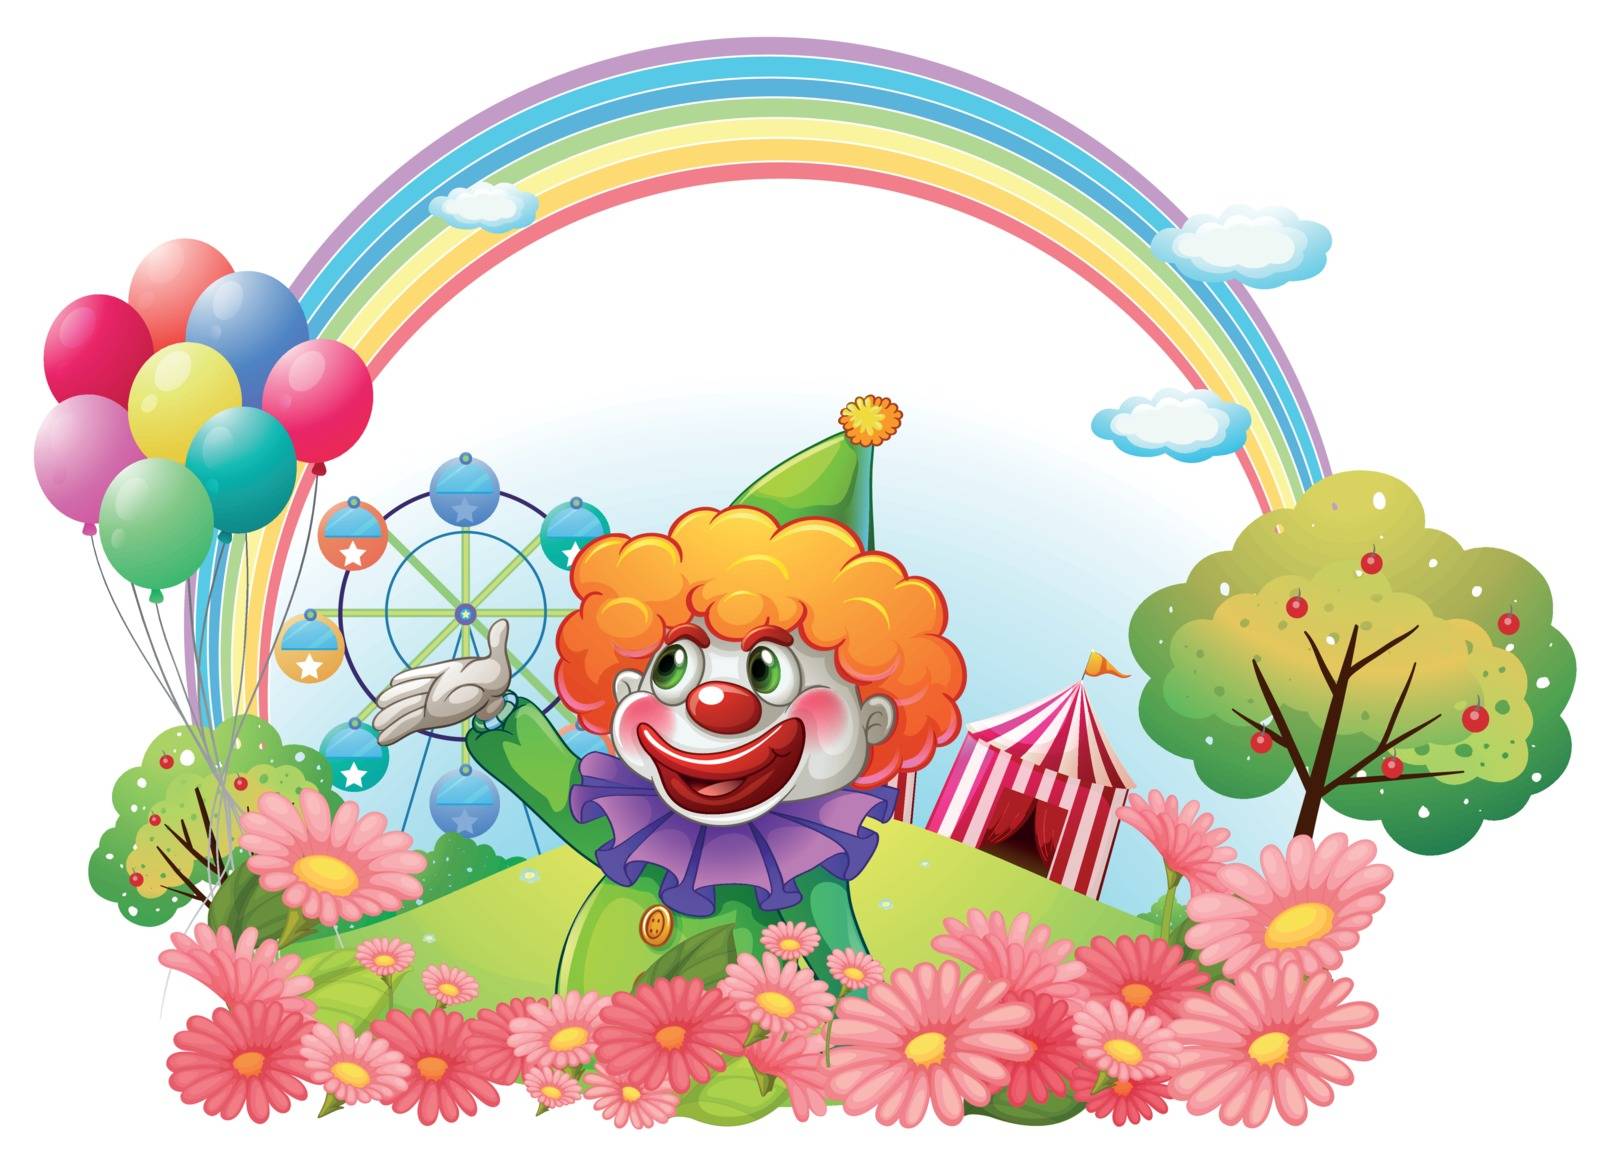 Illustration of a clown in an amusement park on a white background